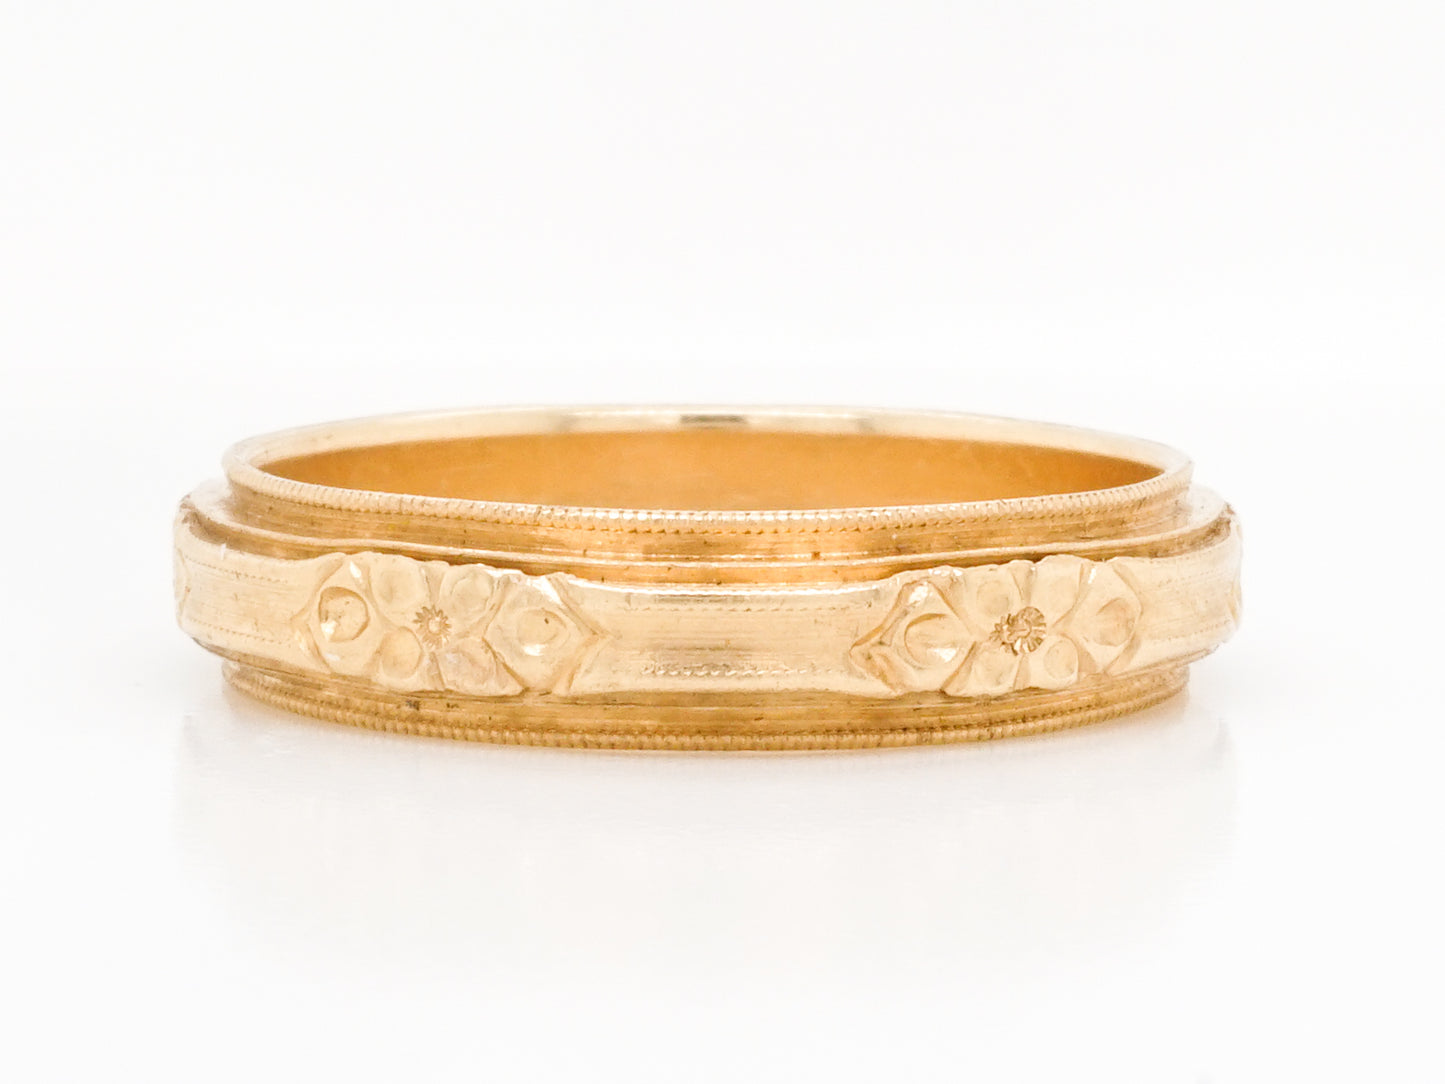 Antique Deco Engraved Wedding Band in 14k Yellow Gold